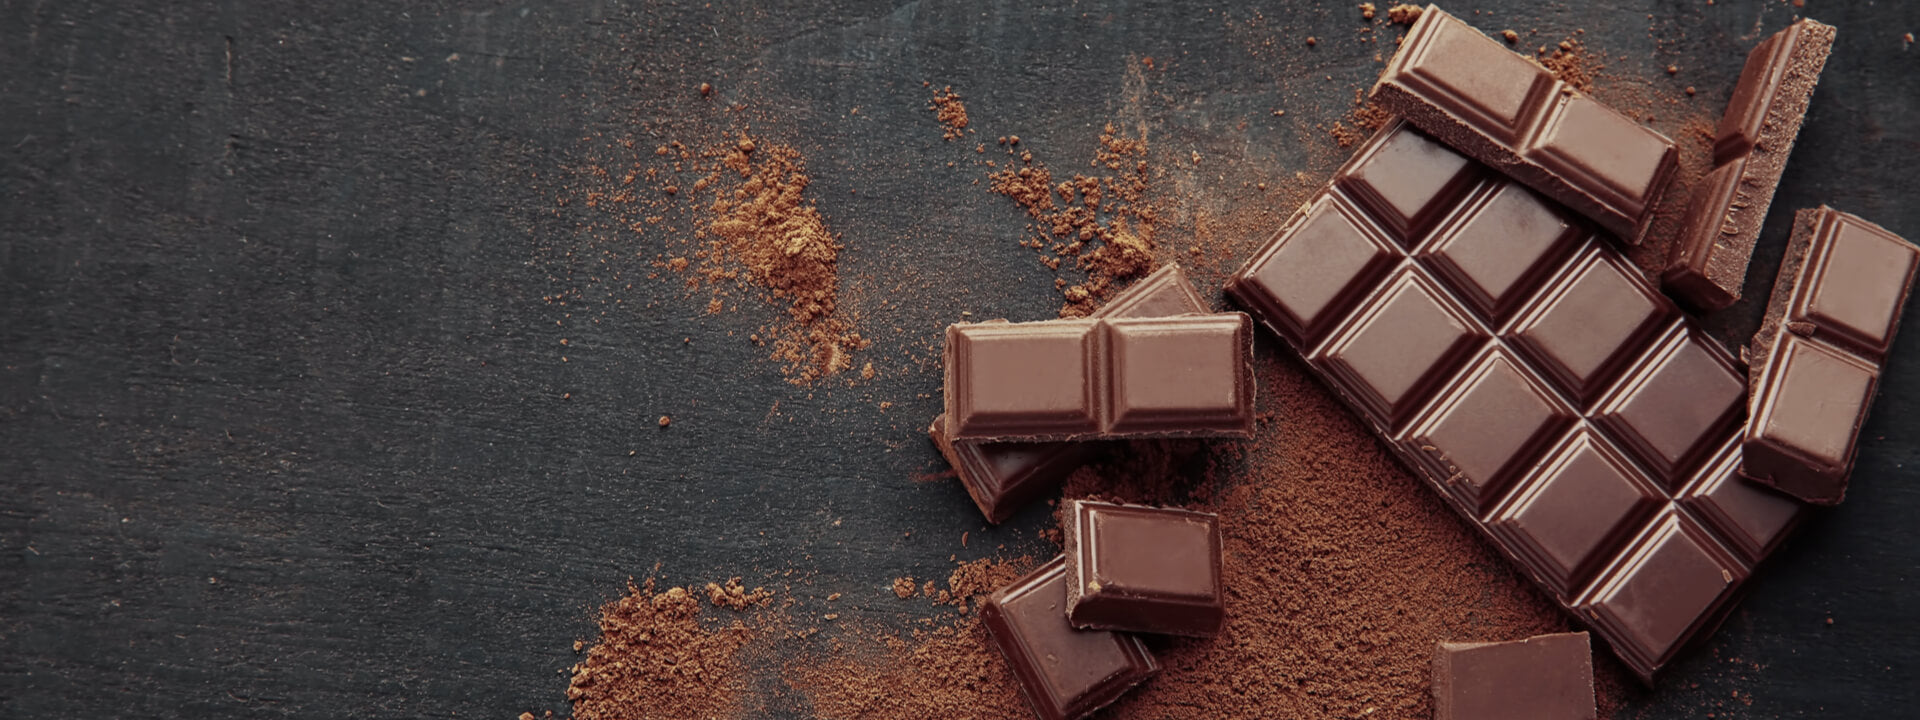 Chocolate – The Sweet Side And The Dark Side